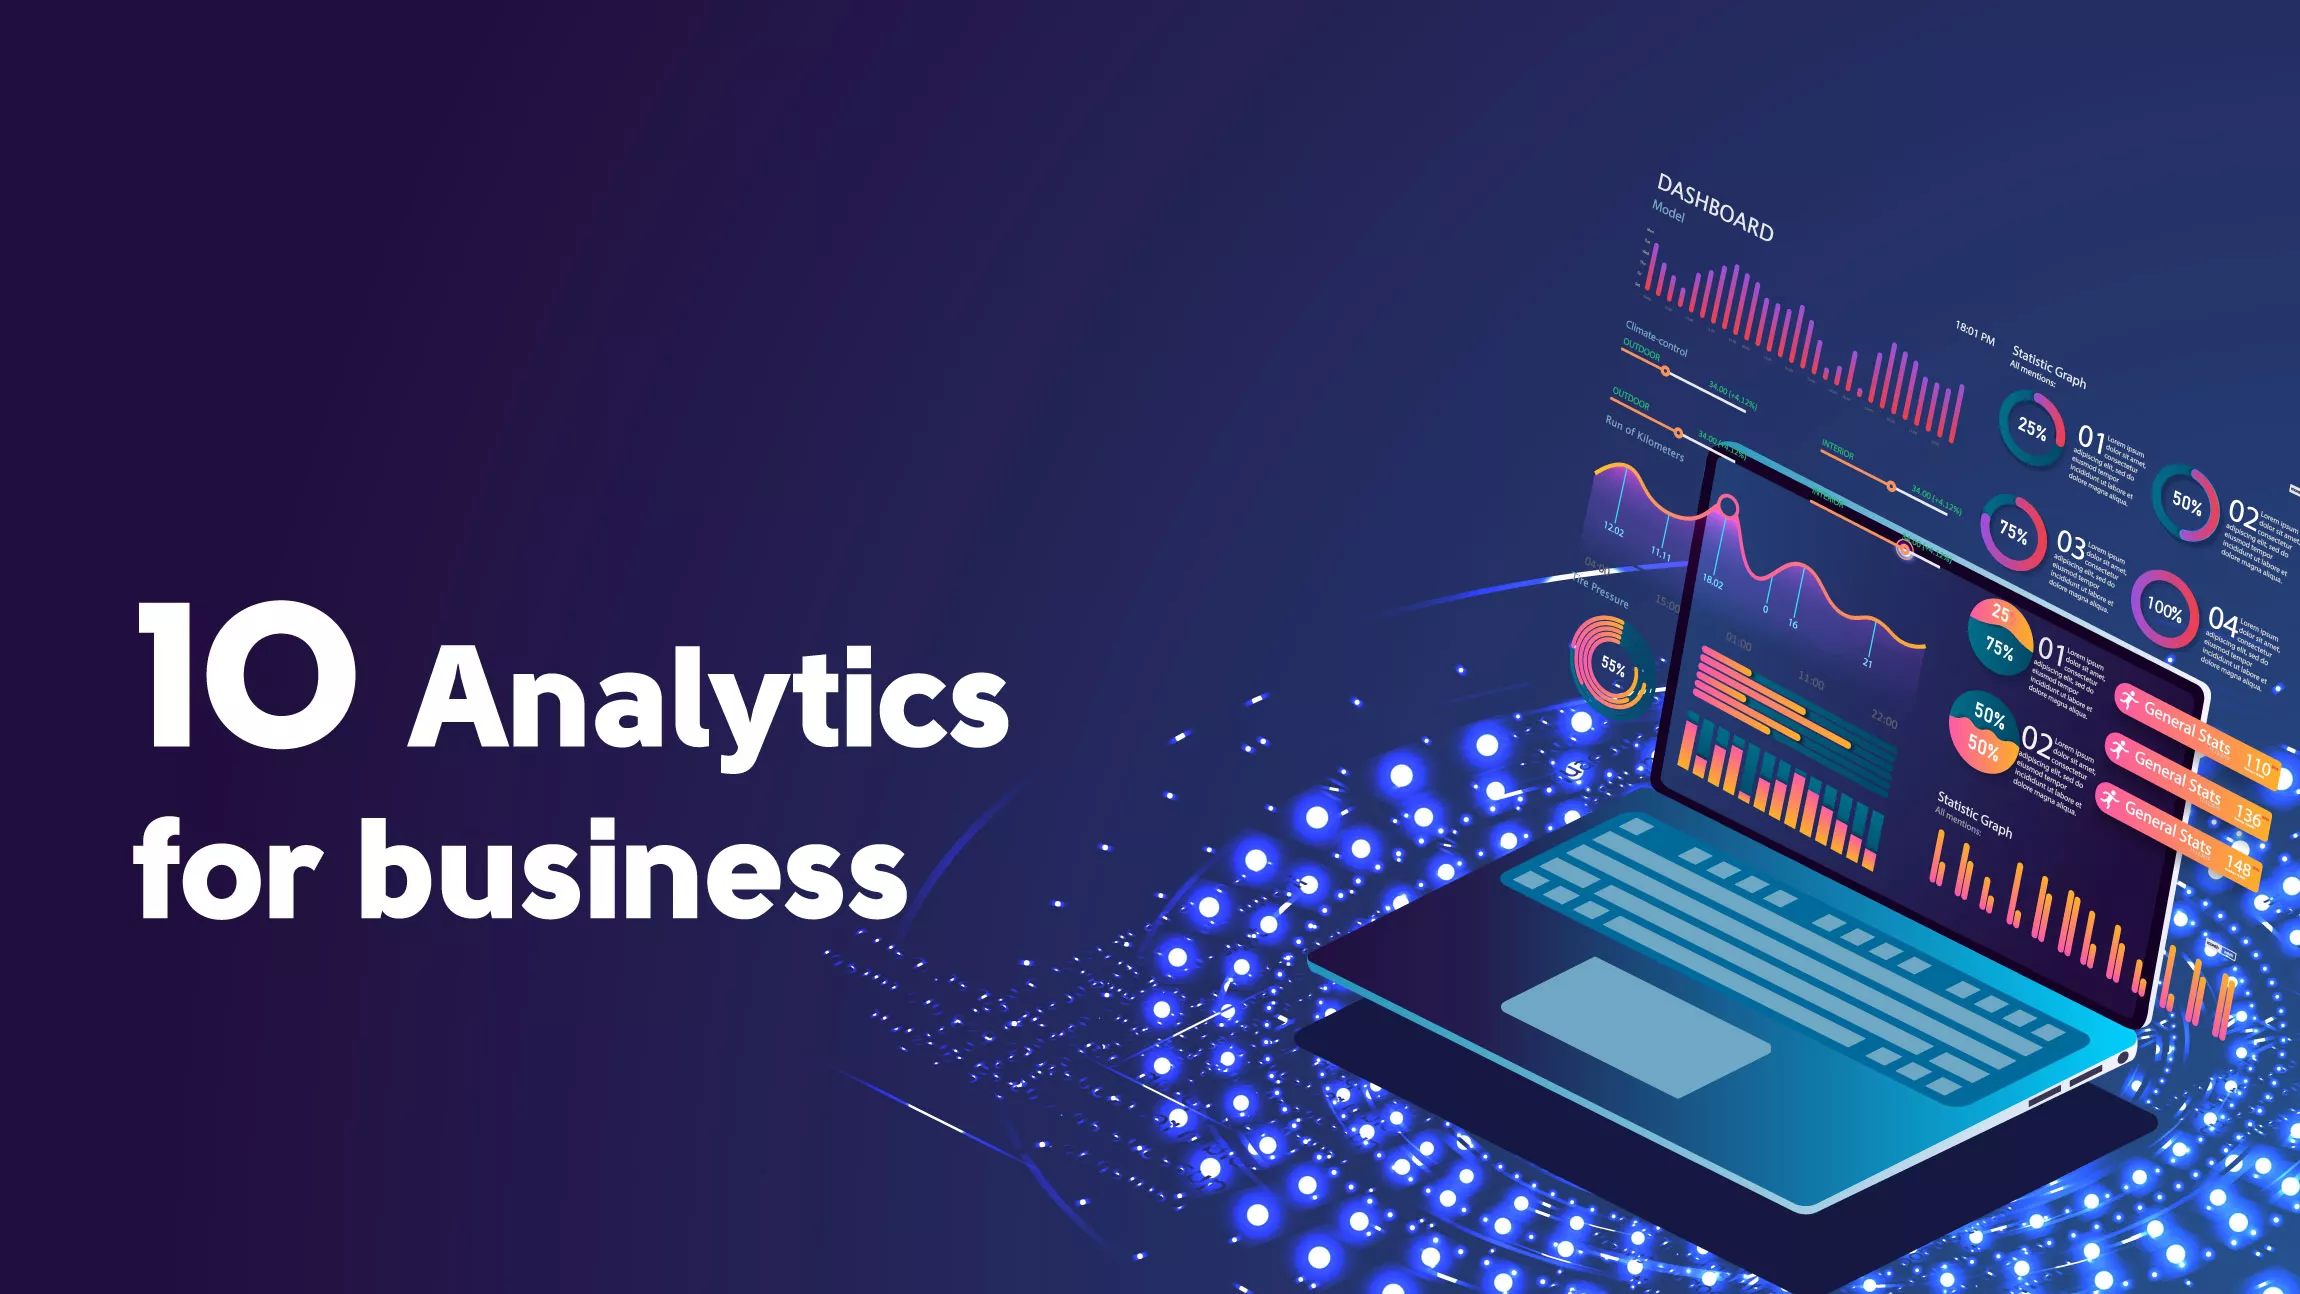 10 Analytics for business